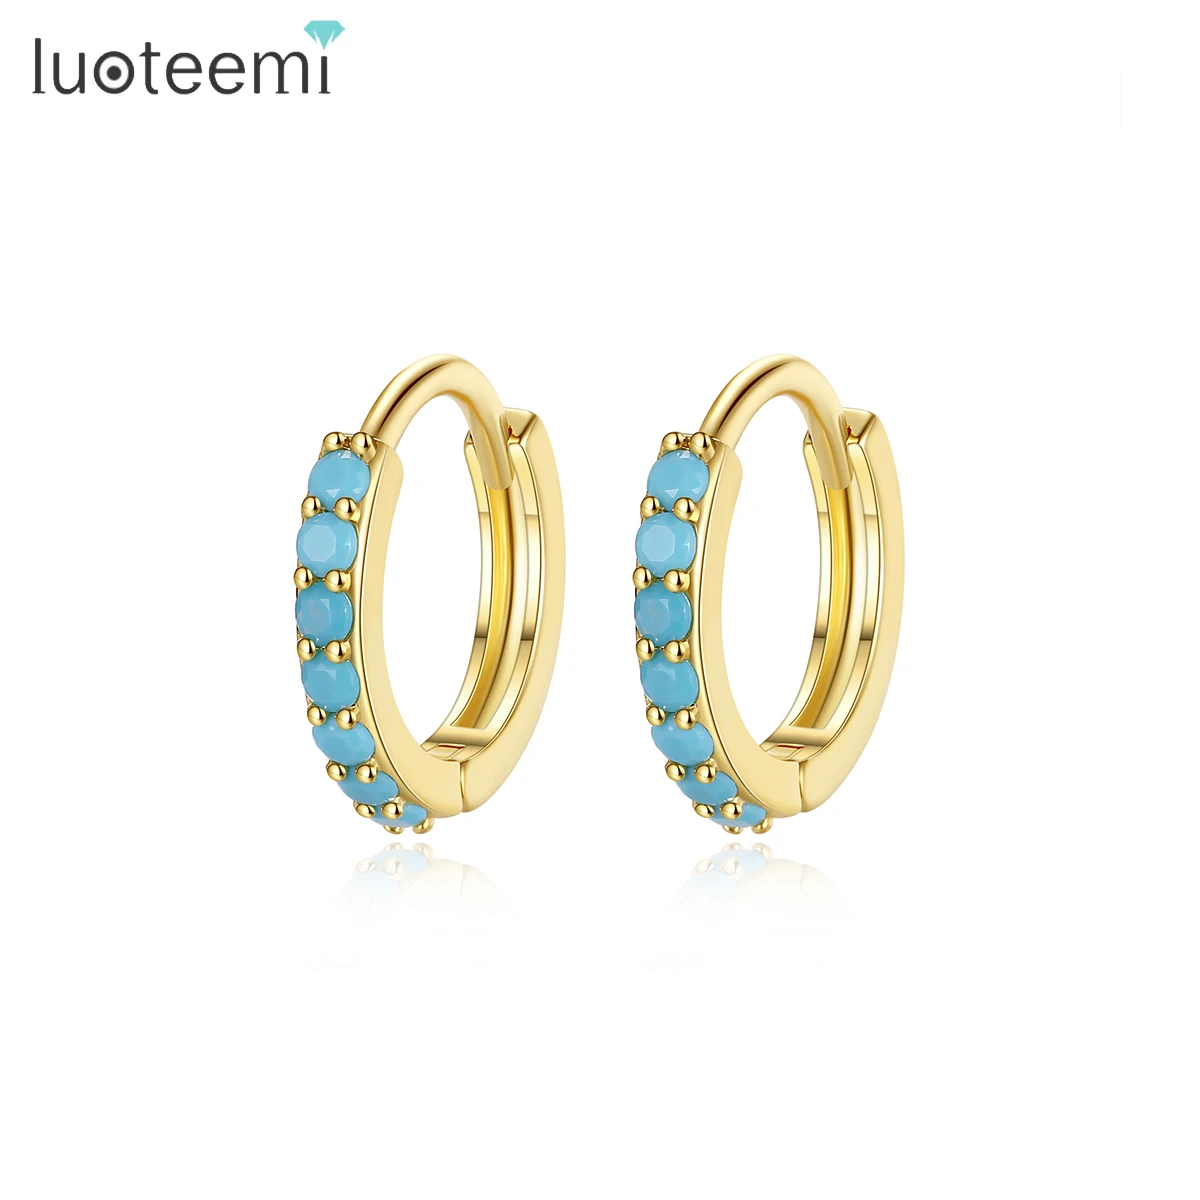 

LUOTEEMI Earing Jewelry Gold Plated Fashion Korean Hot Sale Woman Round Small Clip On Turquoise Boy Earrings